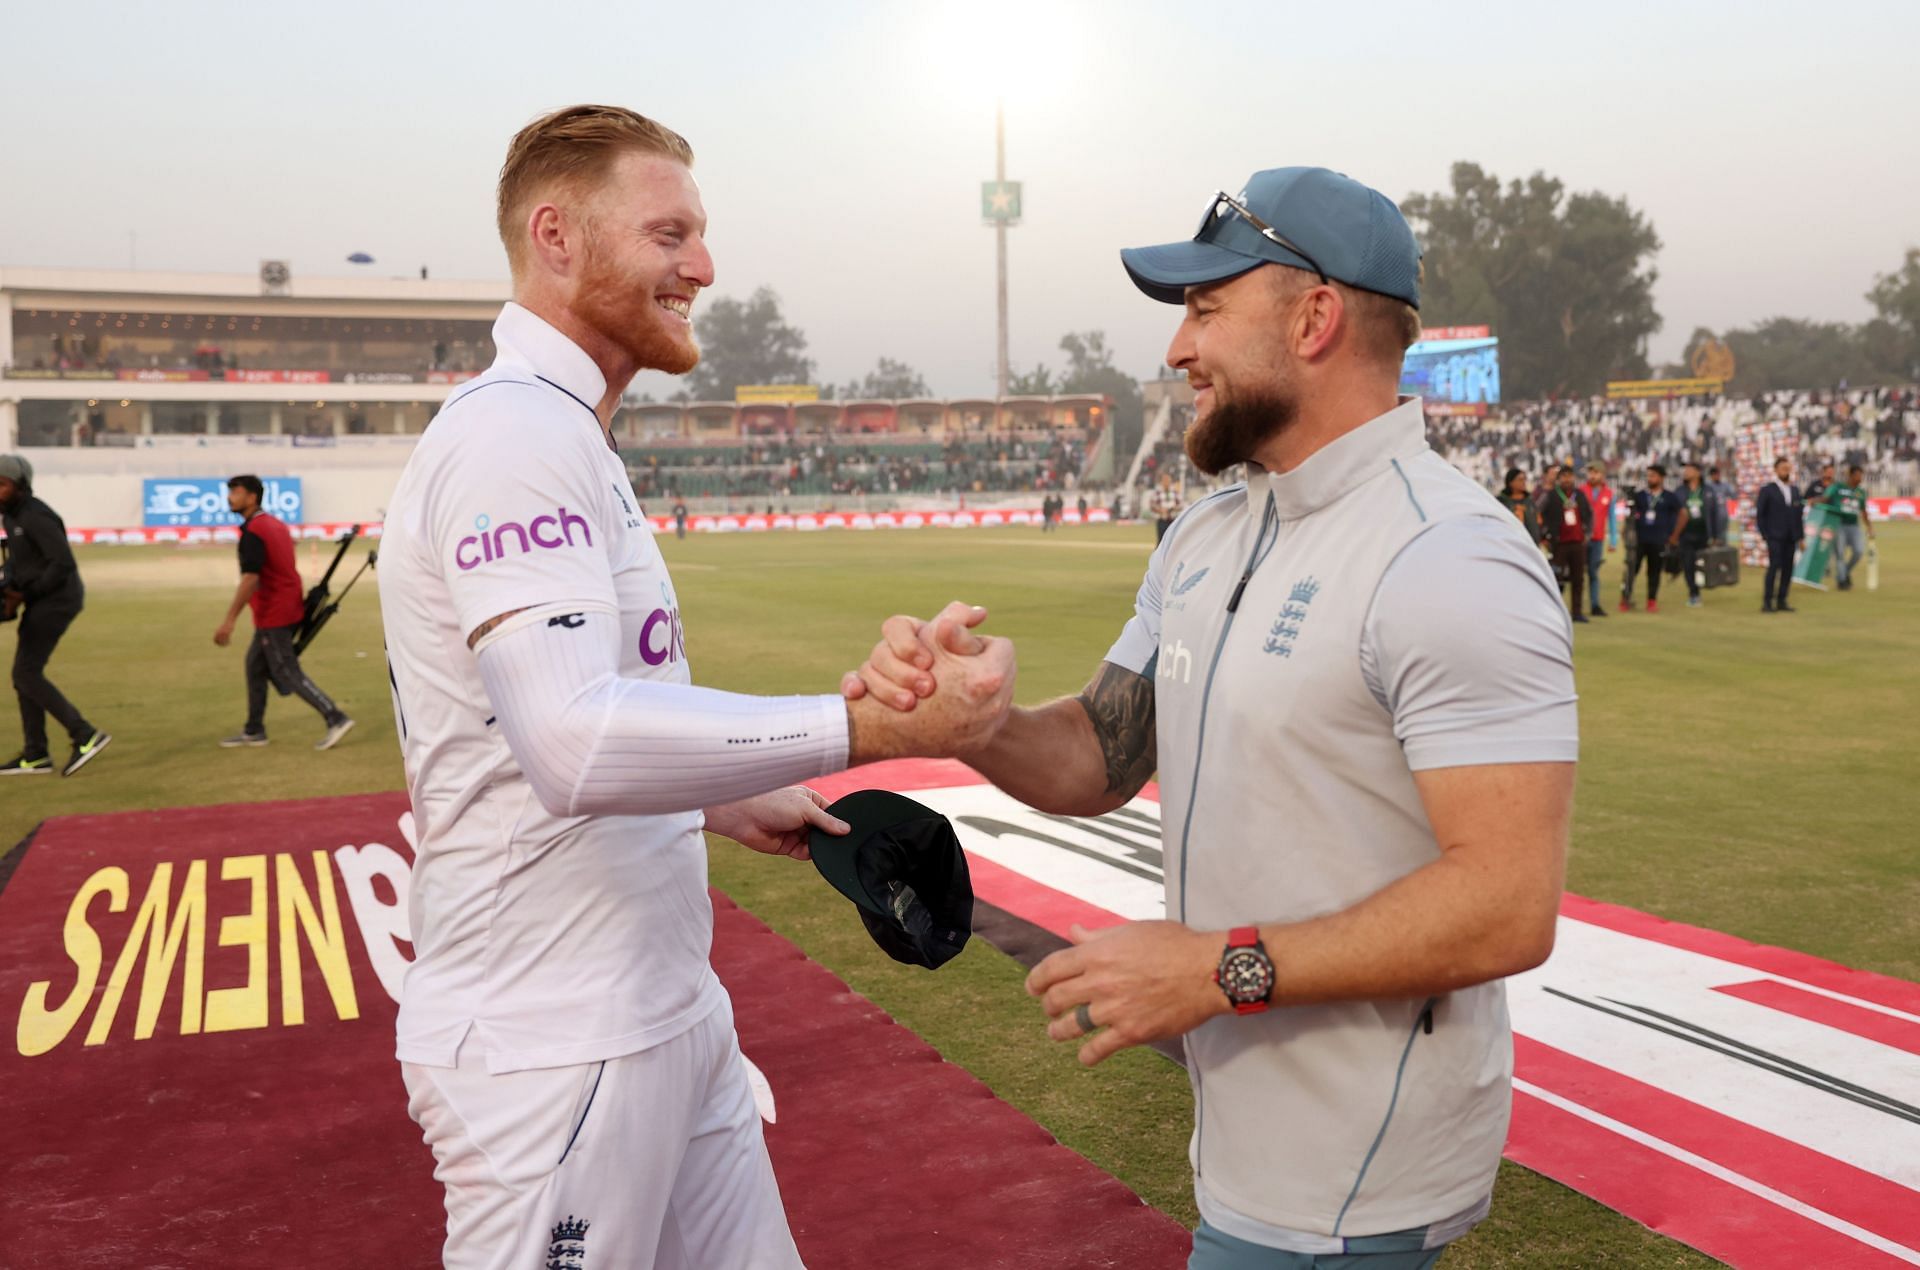 The McCullum-Stokes pair has attained great success over the last year